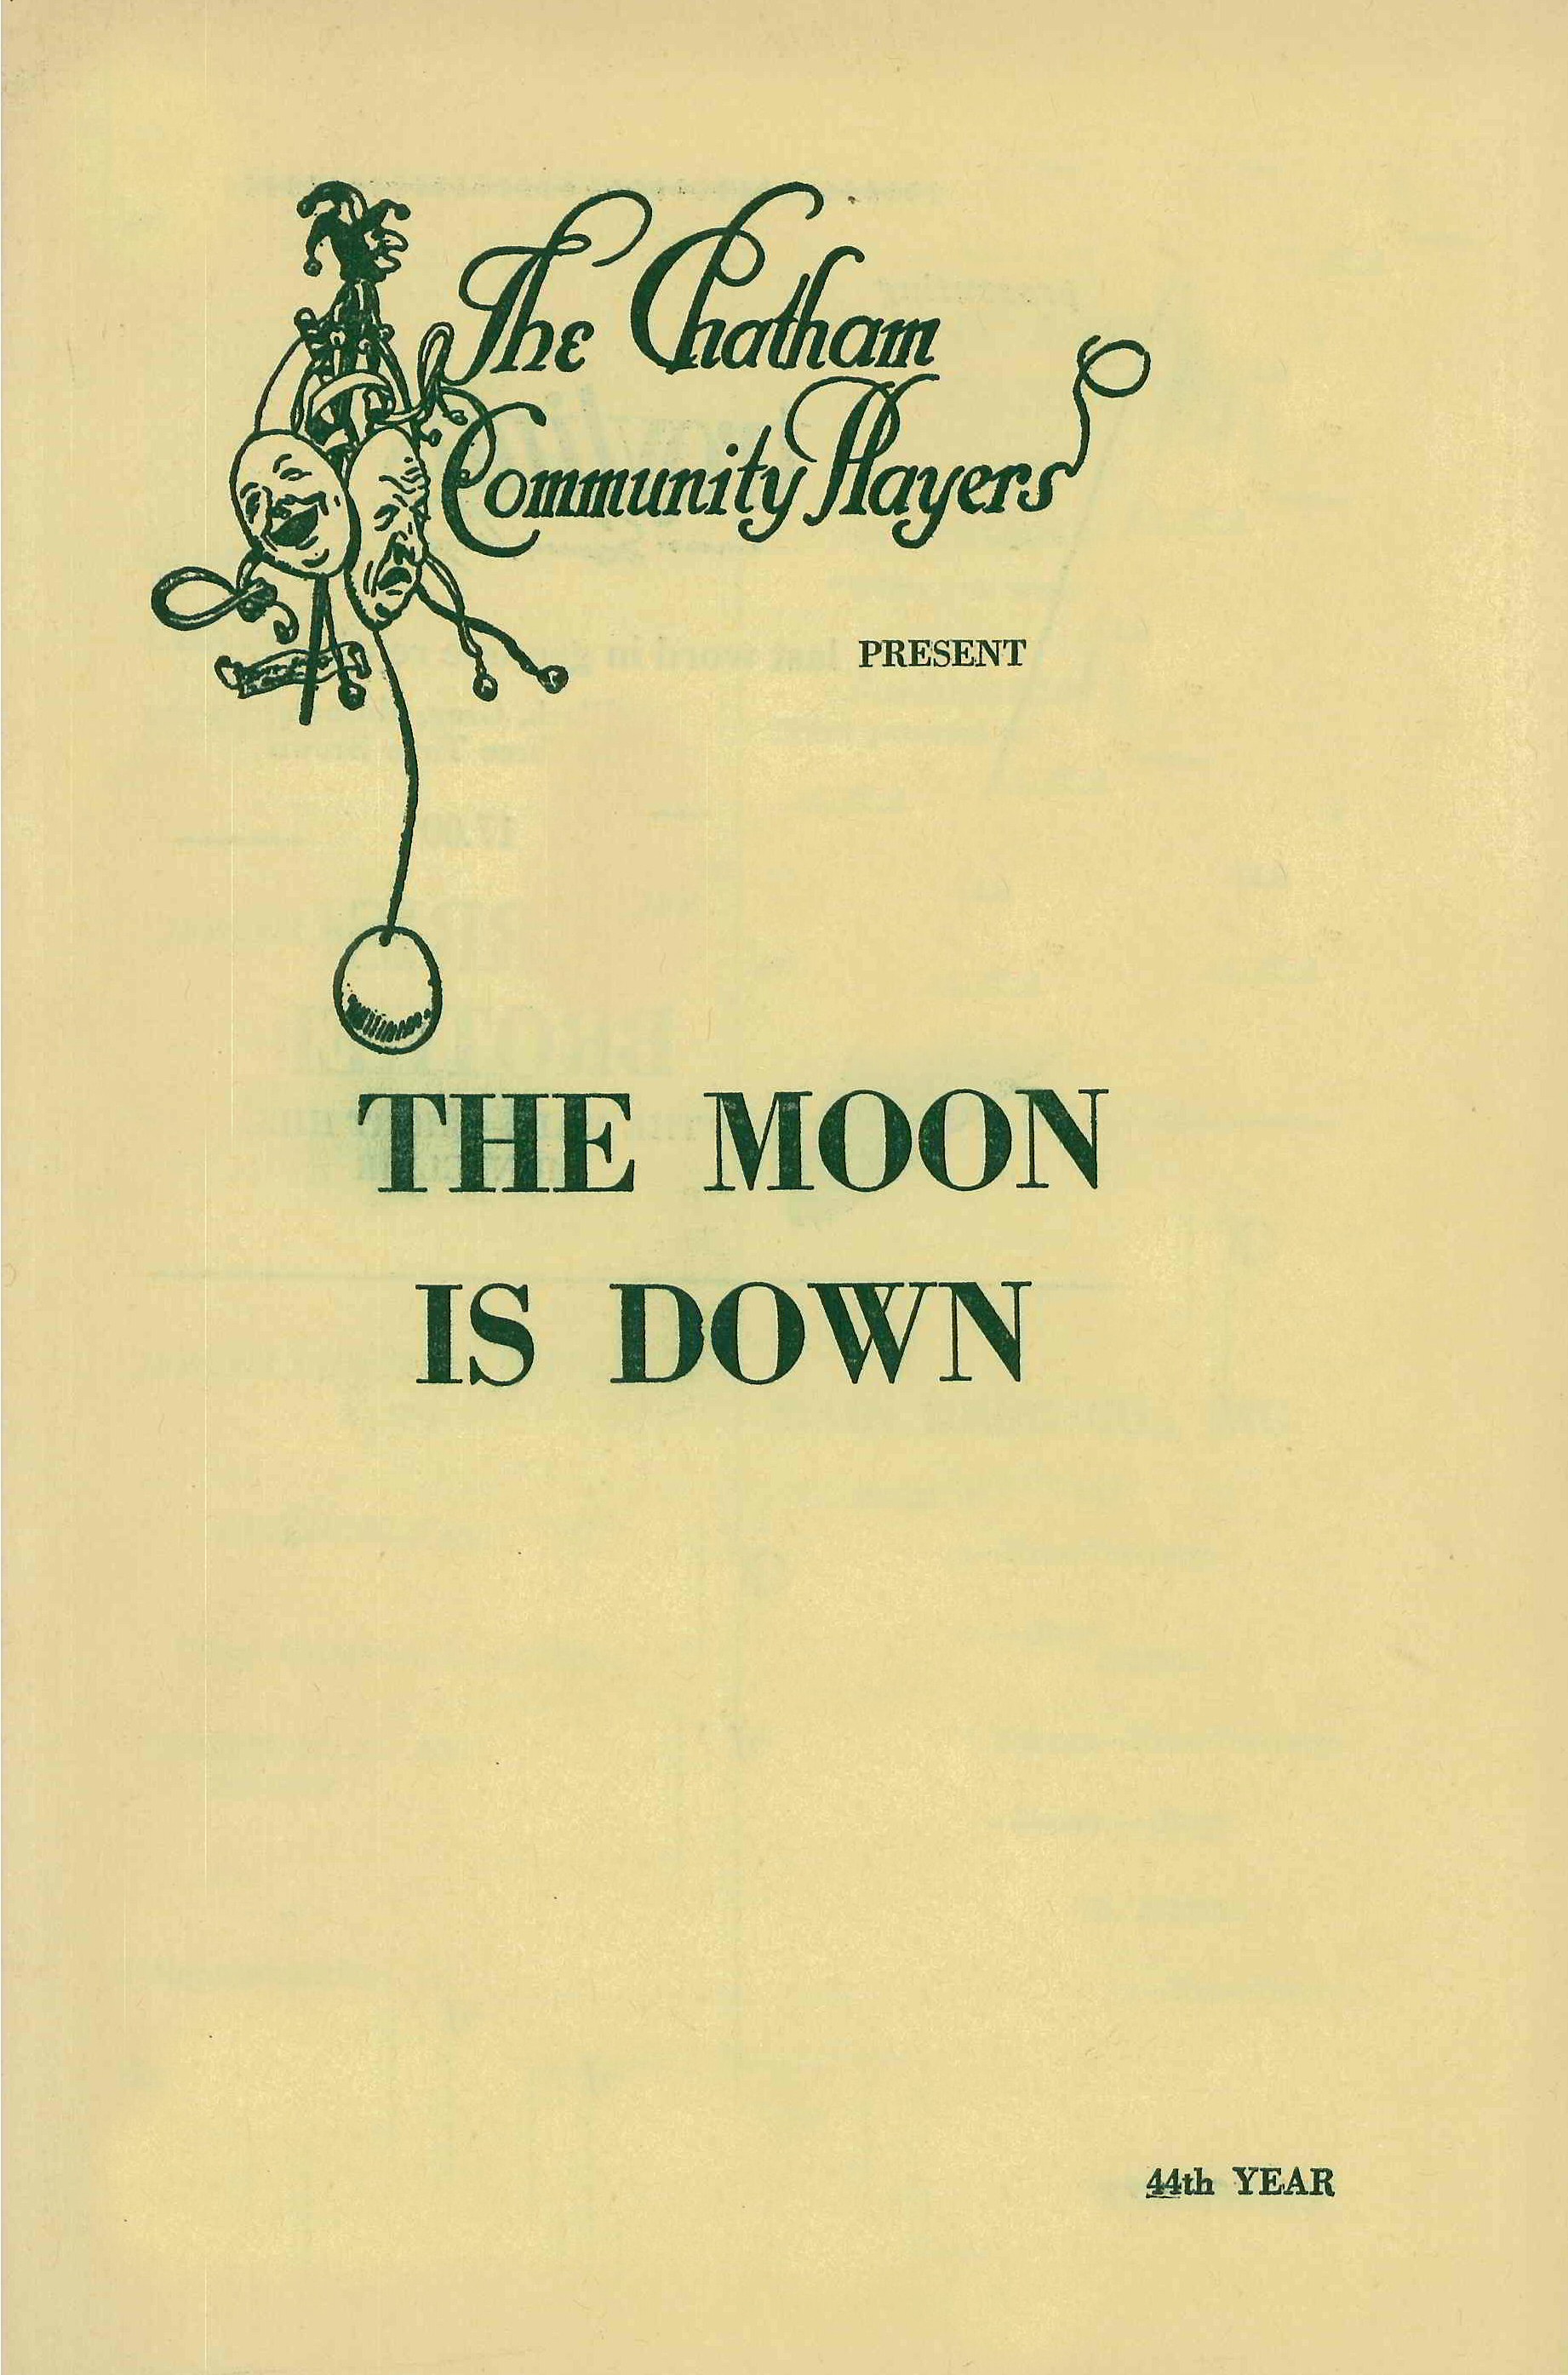 The Moon Is Down (1966)